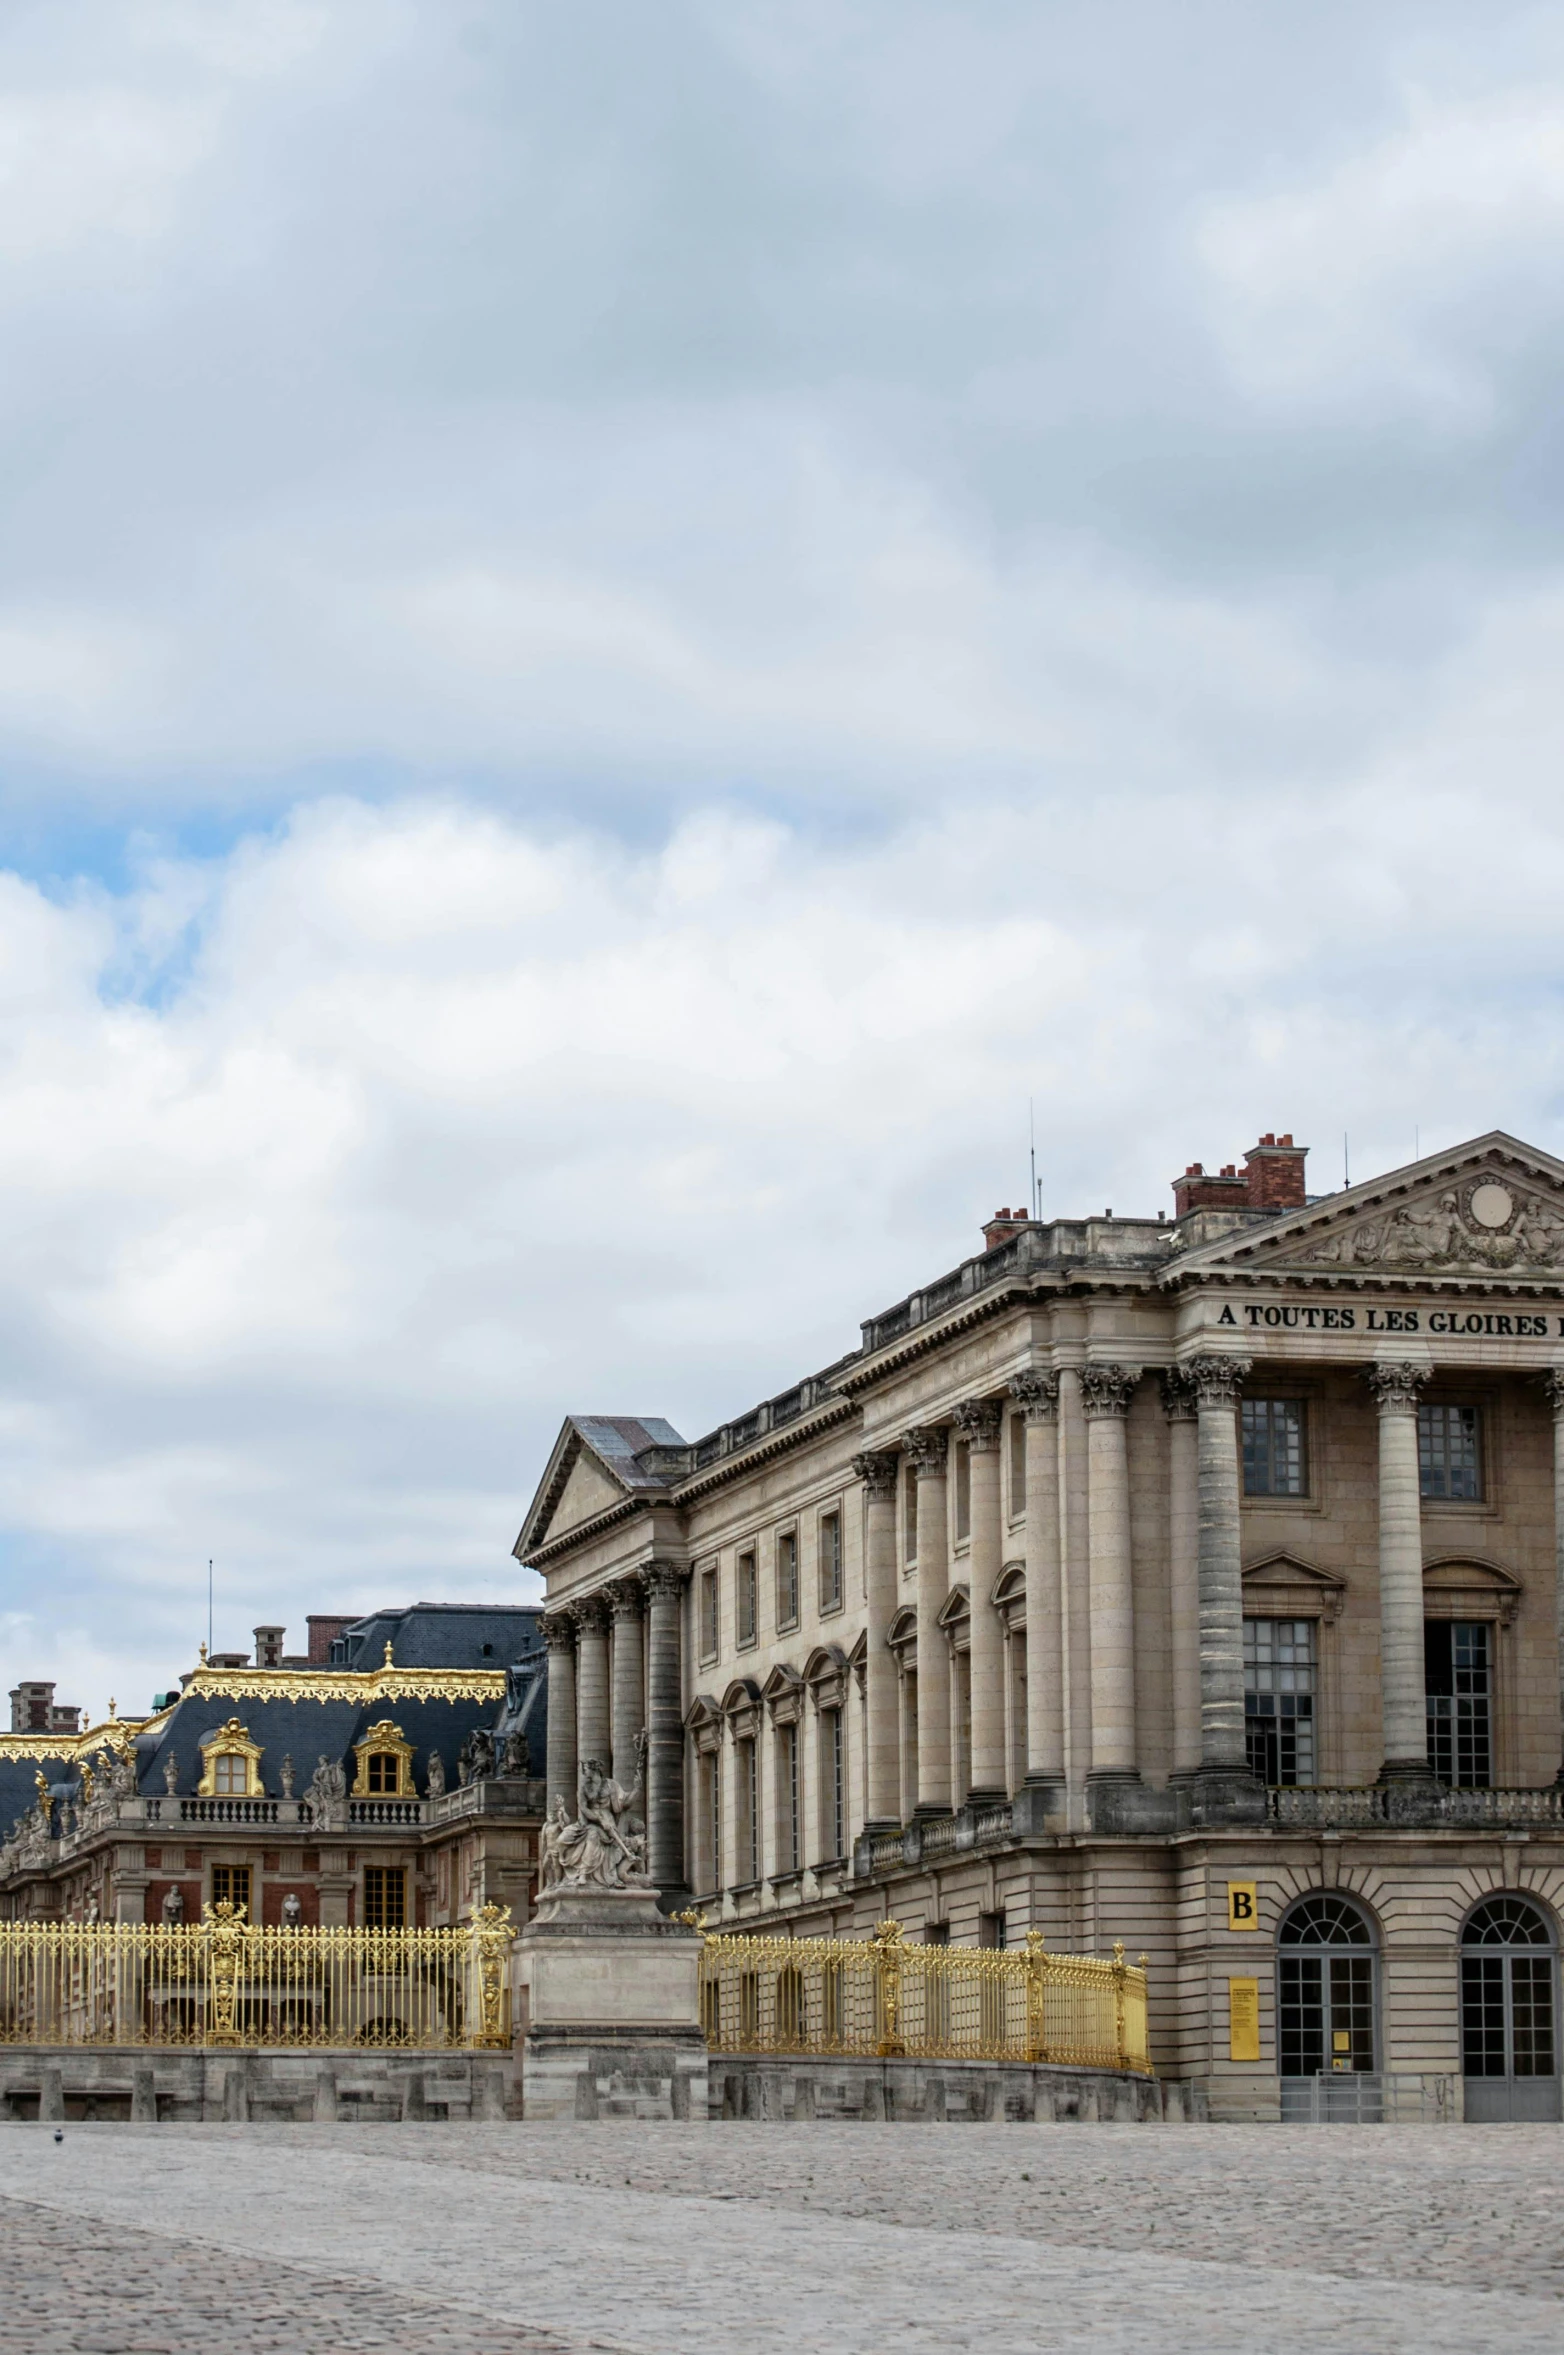 a large building sitting on top of a cobblestone street, inspired by François Girardon, neoclassicism, palace of versailles, 2019 trending photo, 2 5 6 x 2 5 6 pixels, hull